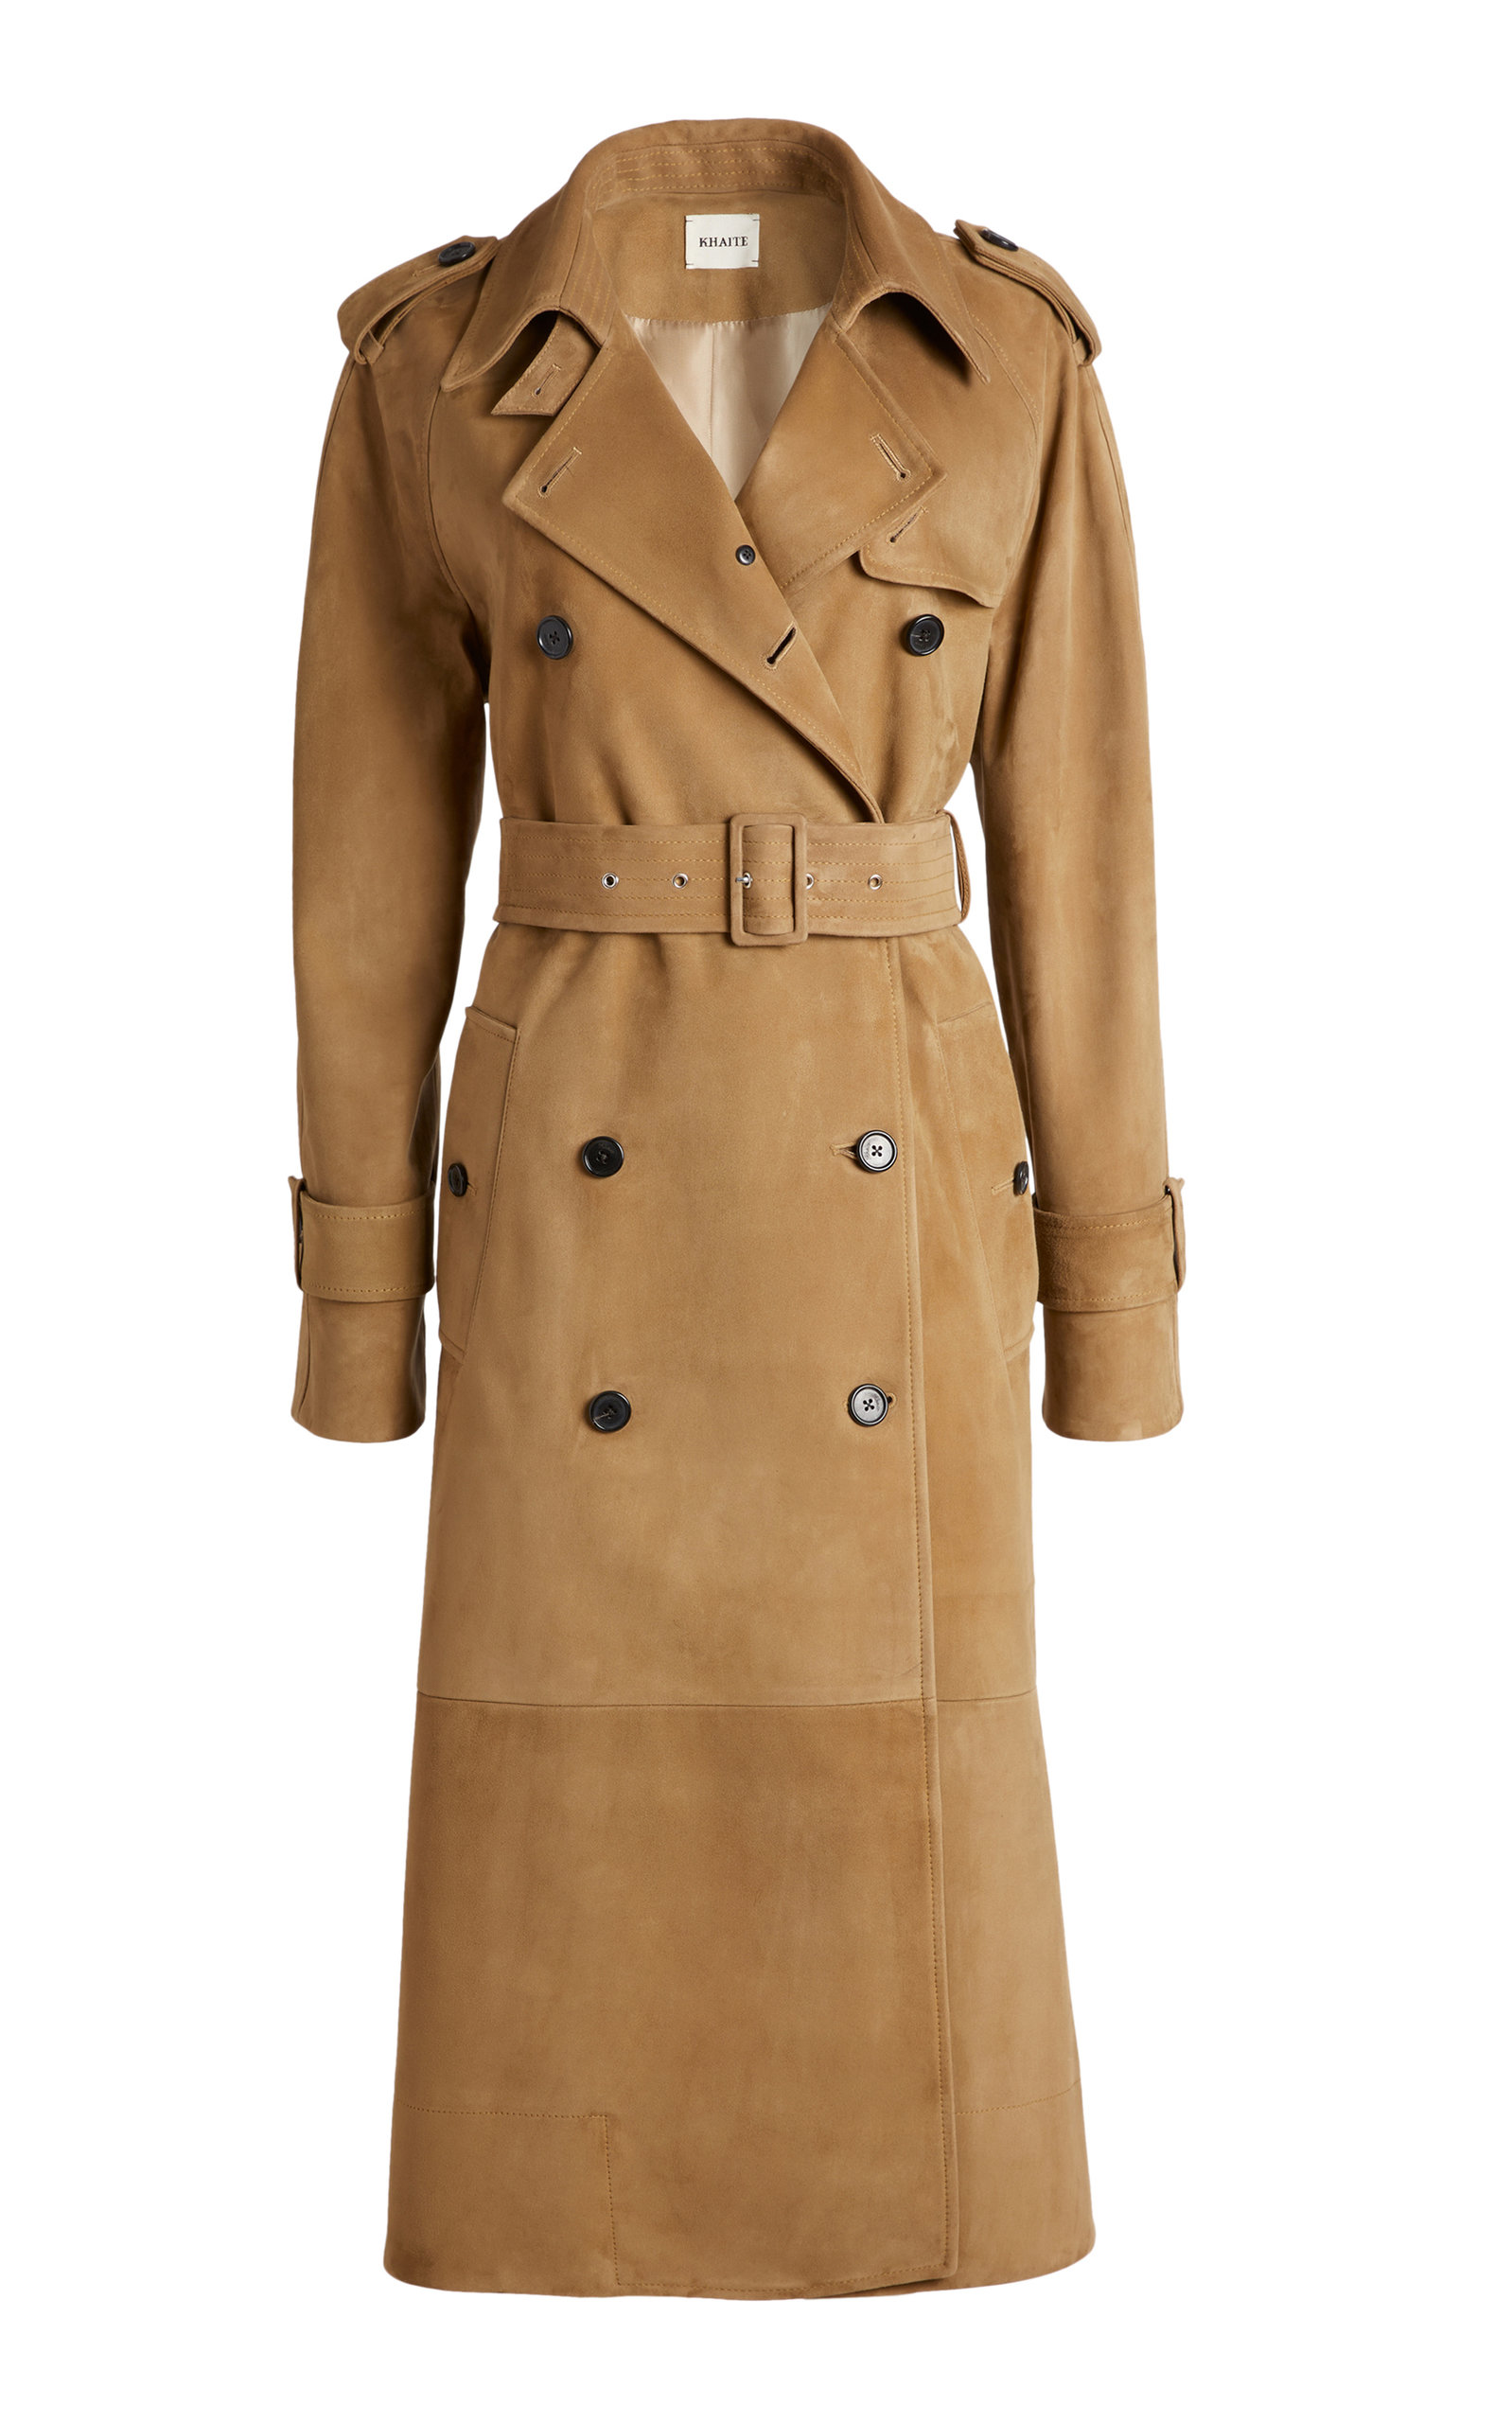 Khaite Women's Selly Suede Trench Coat